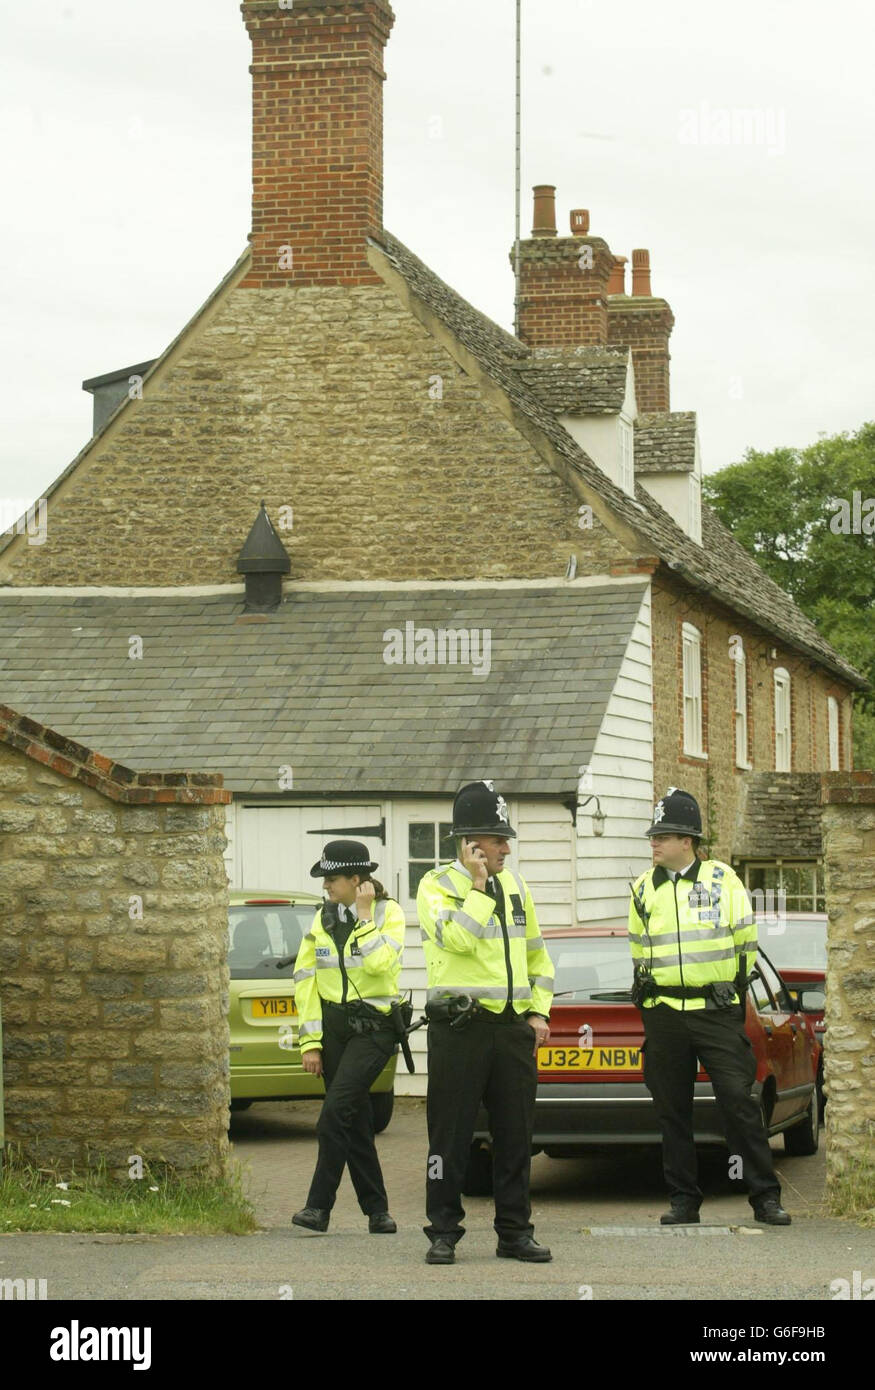 Police officers stand outside the Southmoor home of Dr David Kelly, A Ministry of Defence official at the centre of a row about a Government dossier on weapons of mass destruction, who went missing yesterday. A man's body has been found at nearby Harrowdean Hill. Stock Photo